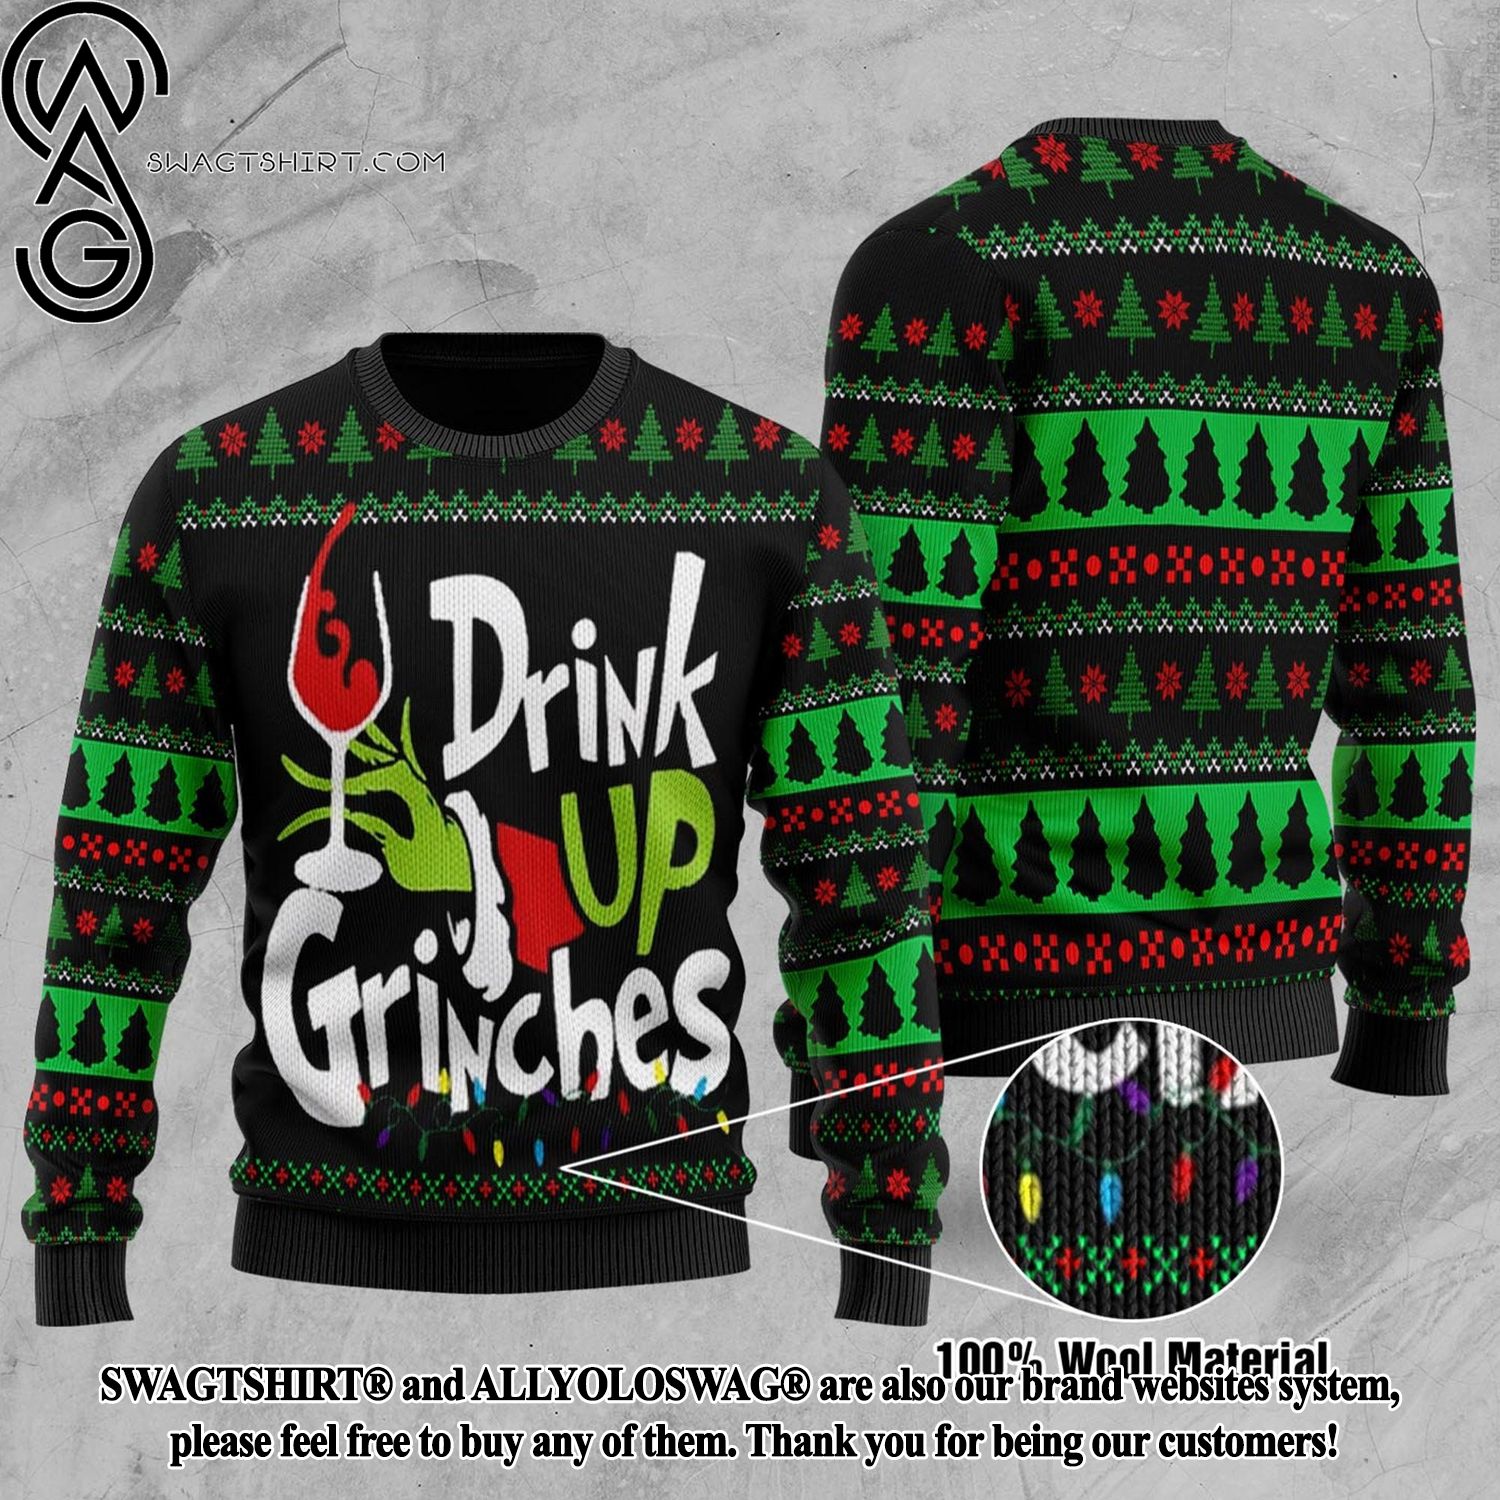 The Grinch Xmas Drink Up Grinches Ugly Christmas Sweater